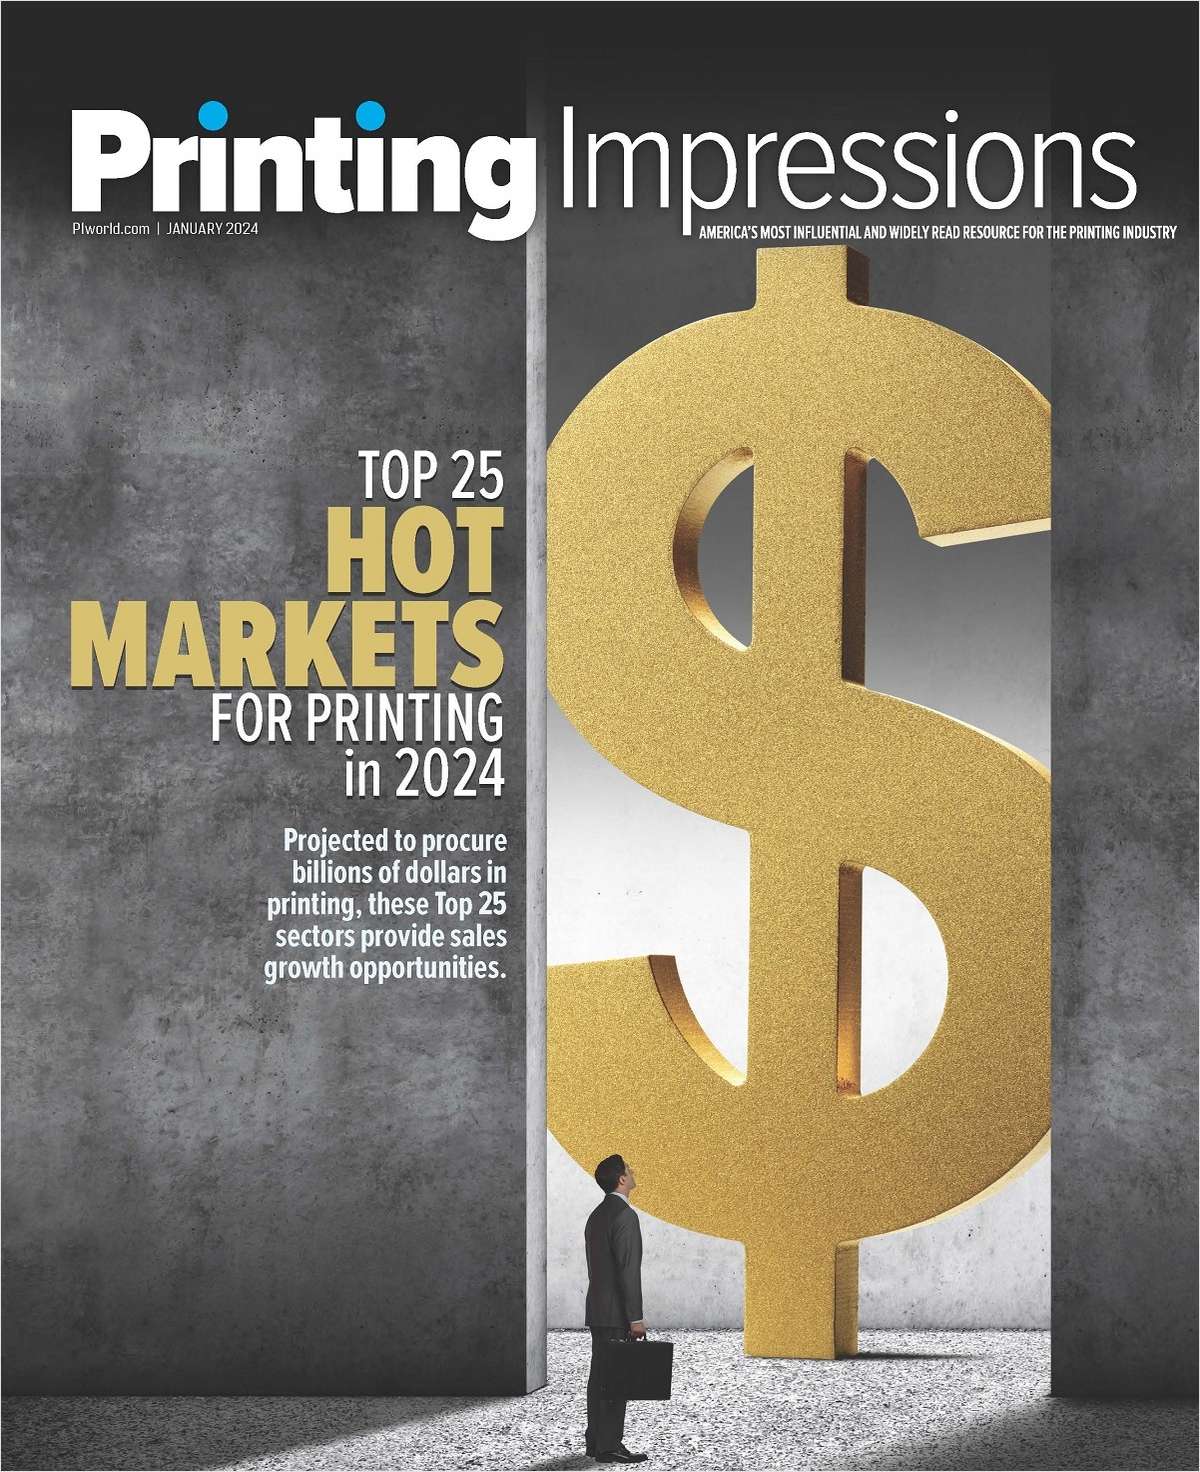 Top 25 Hot Markets for Printing in 2024